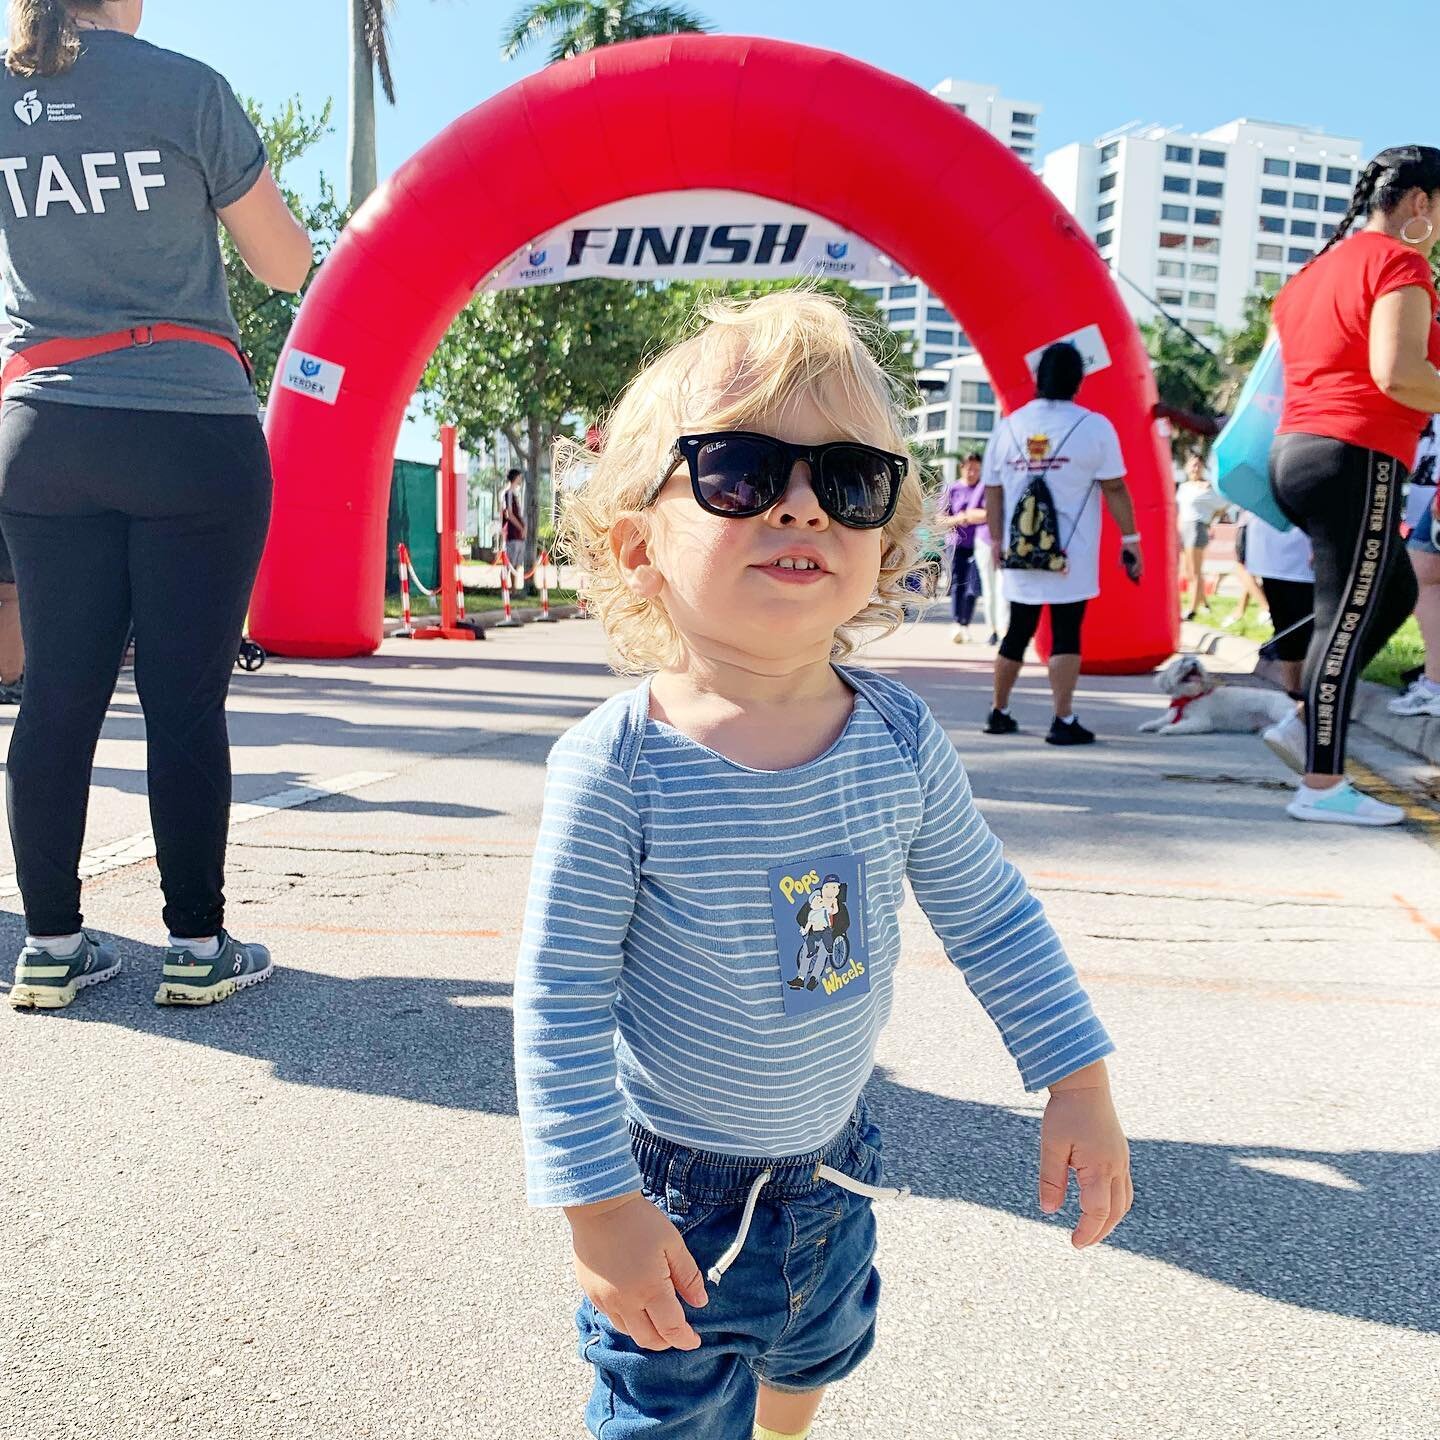 Great morning with The American Heart and American Stroke Association! ❤️❤️❤️❤️❤️@americanheartfl #heartwalk